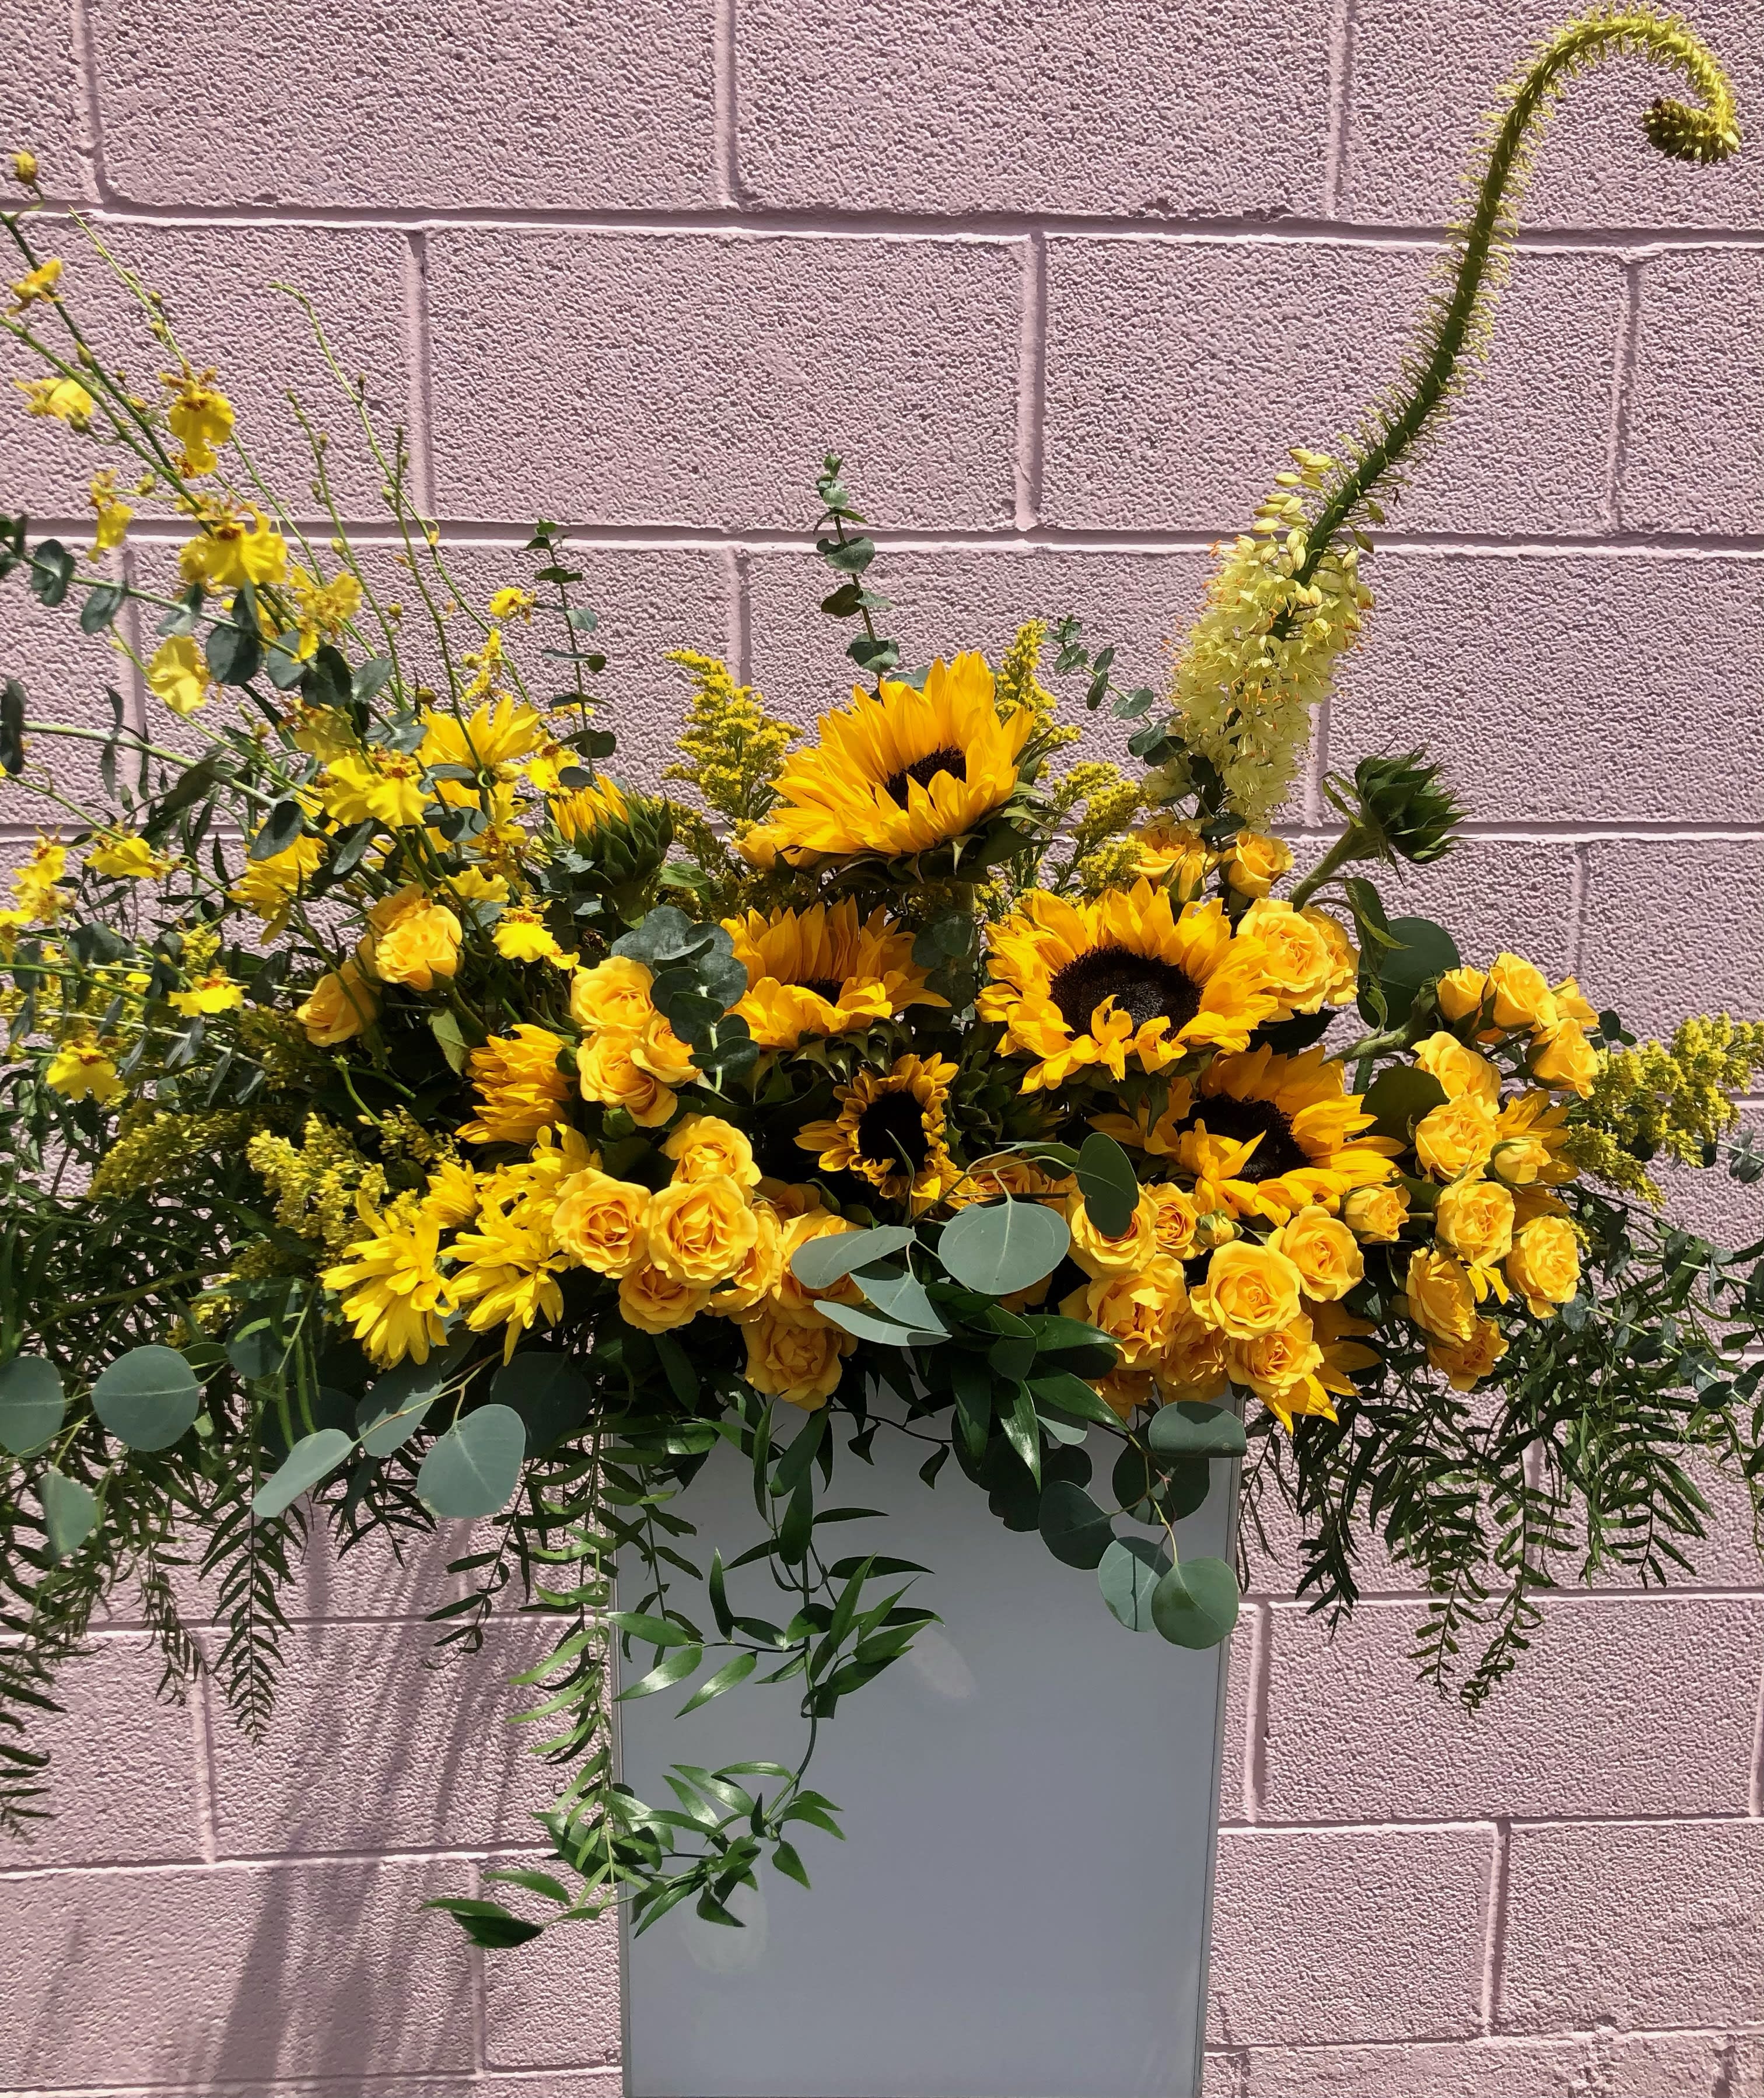 Little Miss Sunshine - We think she's the most beautiful girl in the world and it's not just about her looks! She's bright, beautiful and a sun goddess!  Arrangement includes sunflowers, garden roses and other beautifully toned elements.